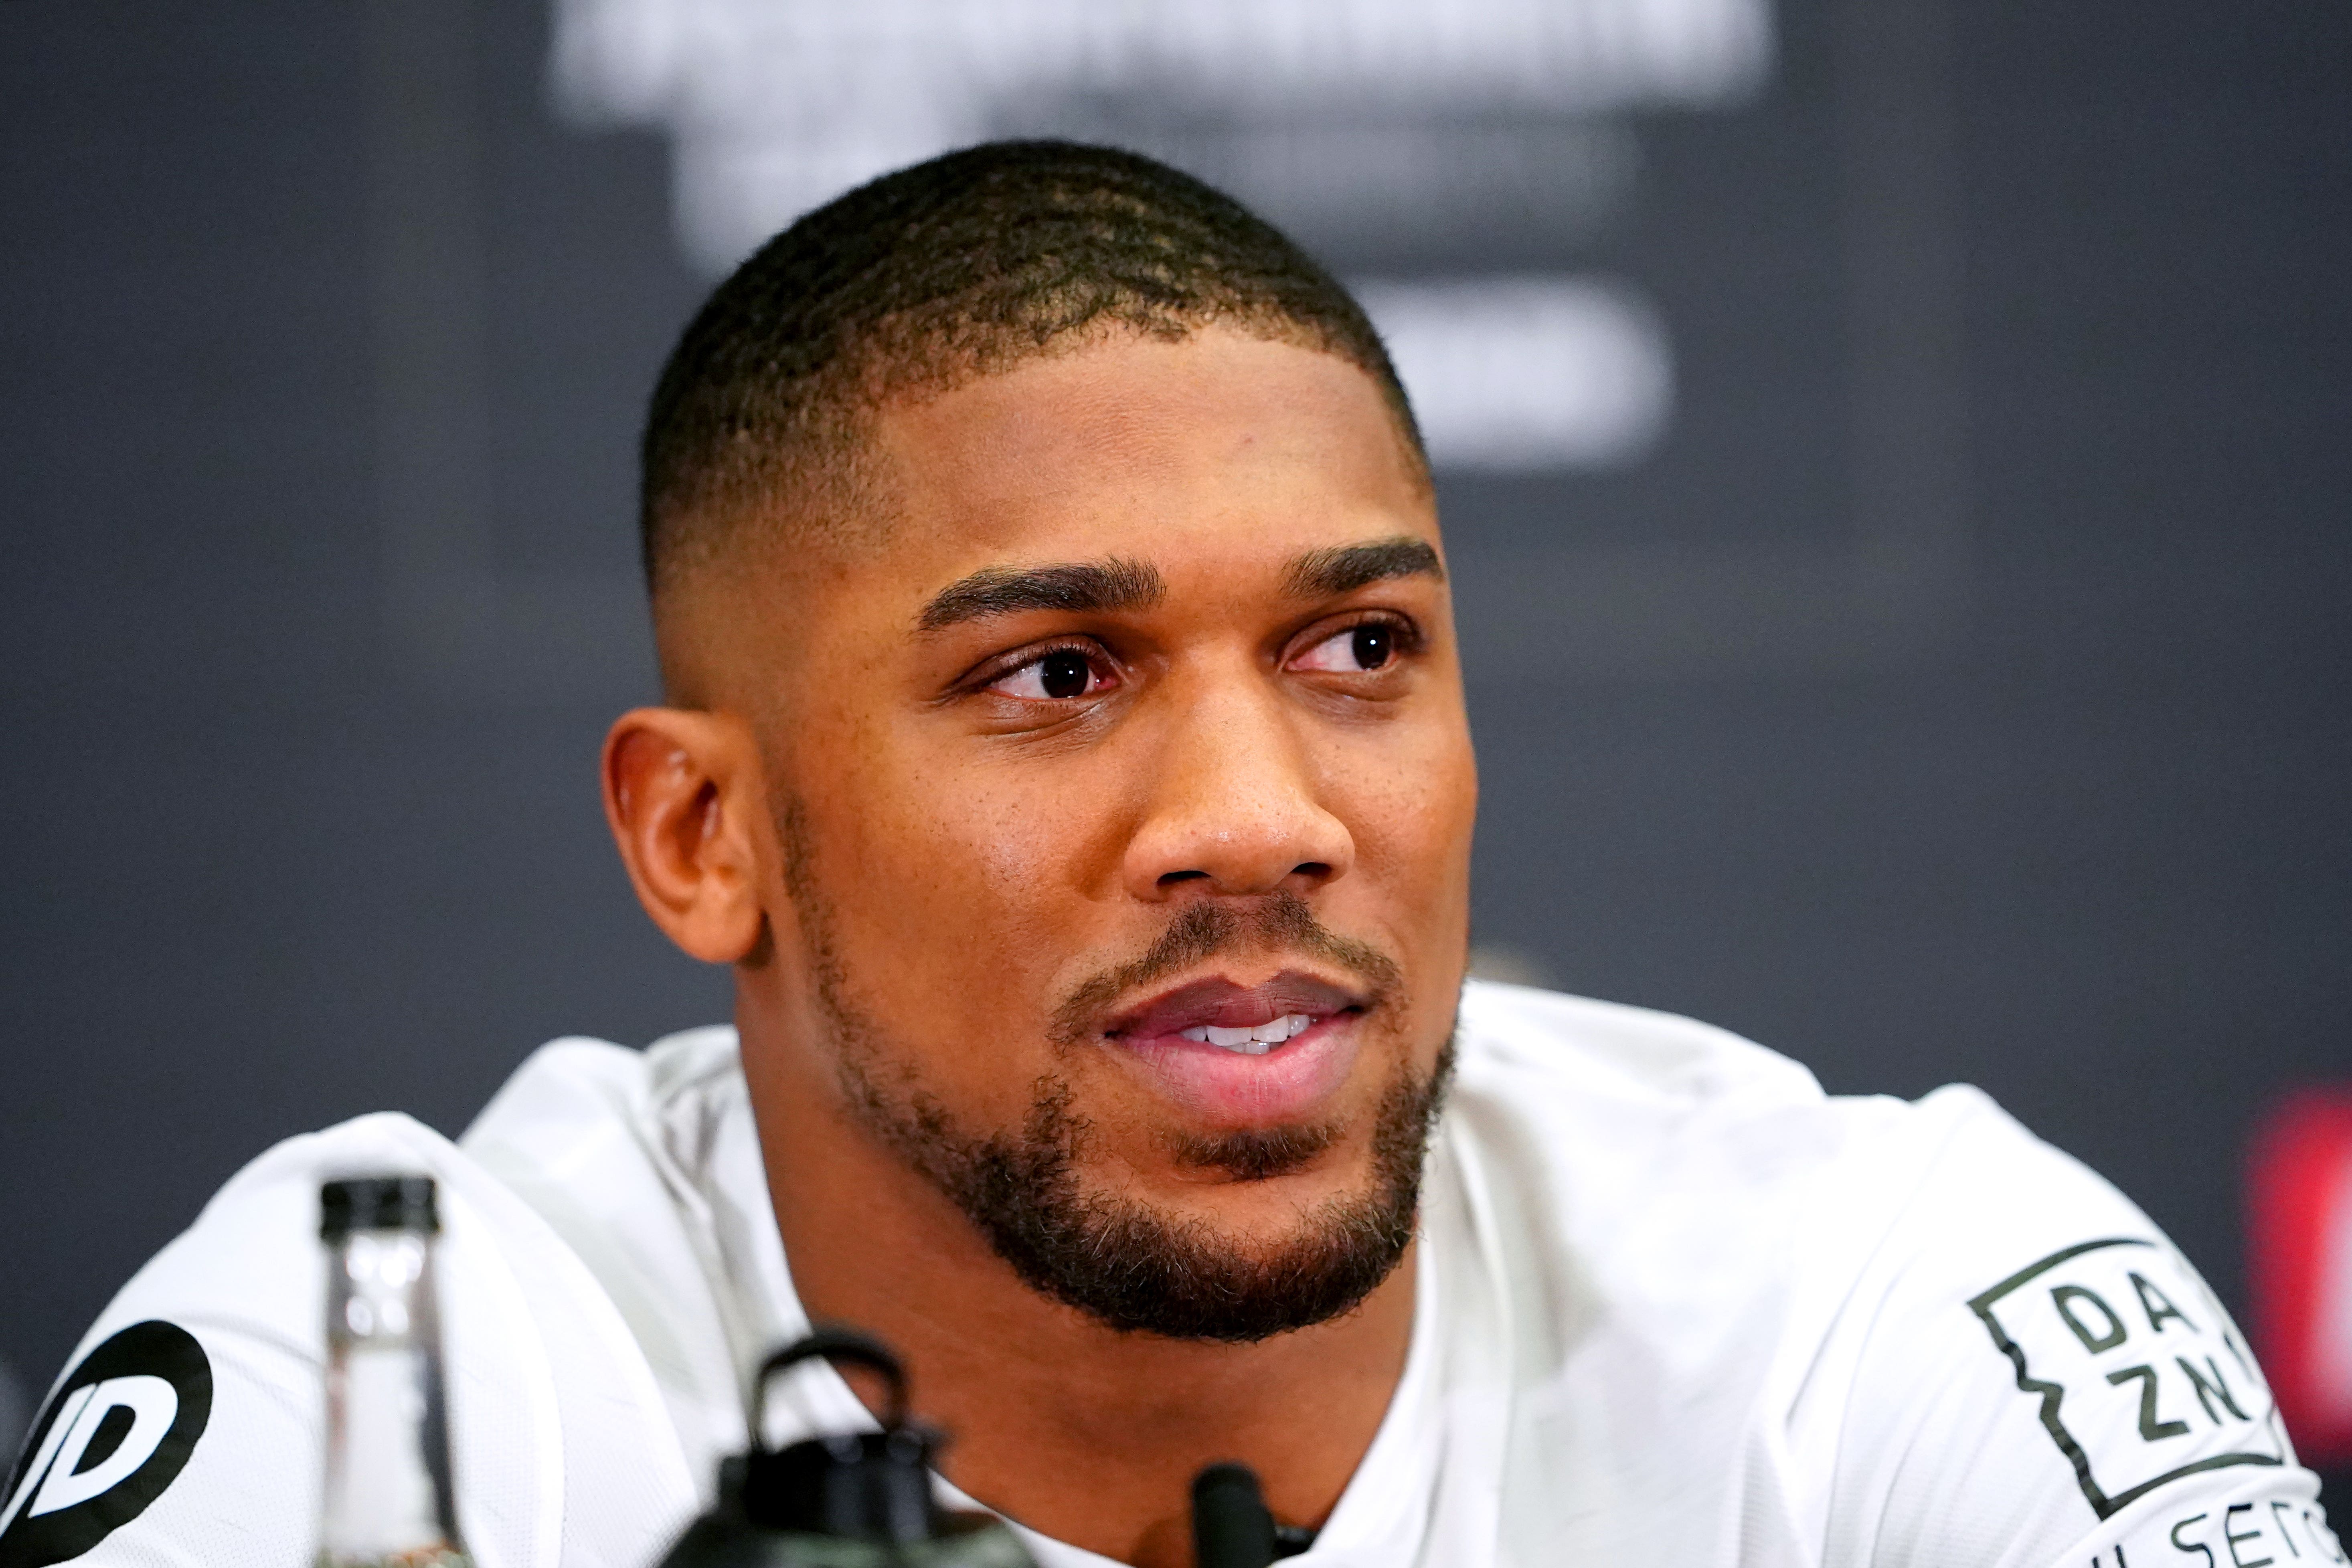 Anthony Joshua acknowledges he is approaching the last run of his professional career